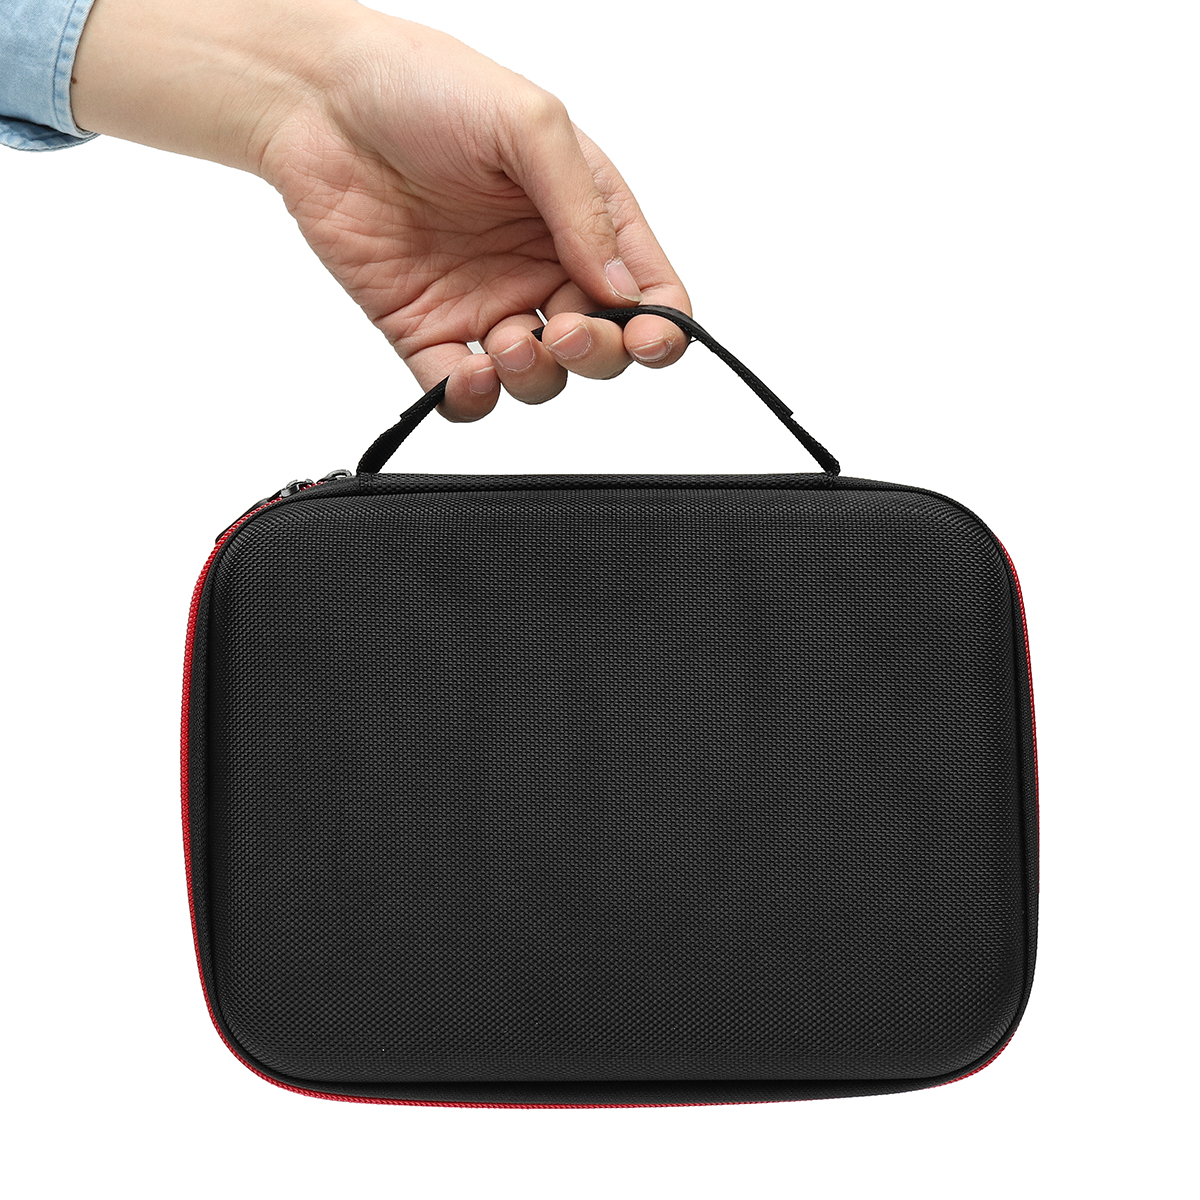 Portable Travel Storage Box Carry Case Bag For Nintendo Switch MINI SFC Game Console 17